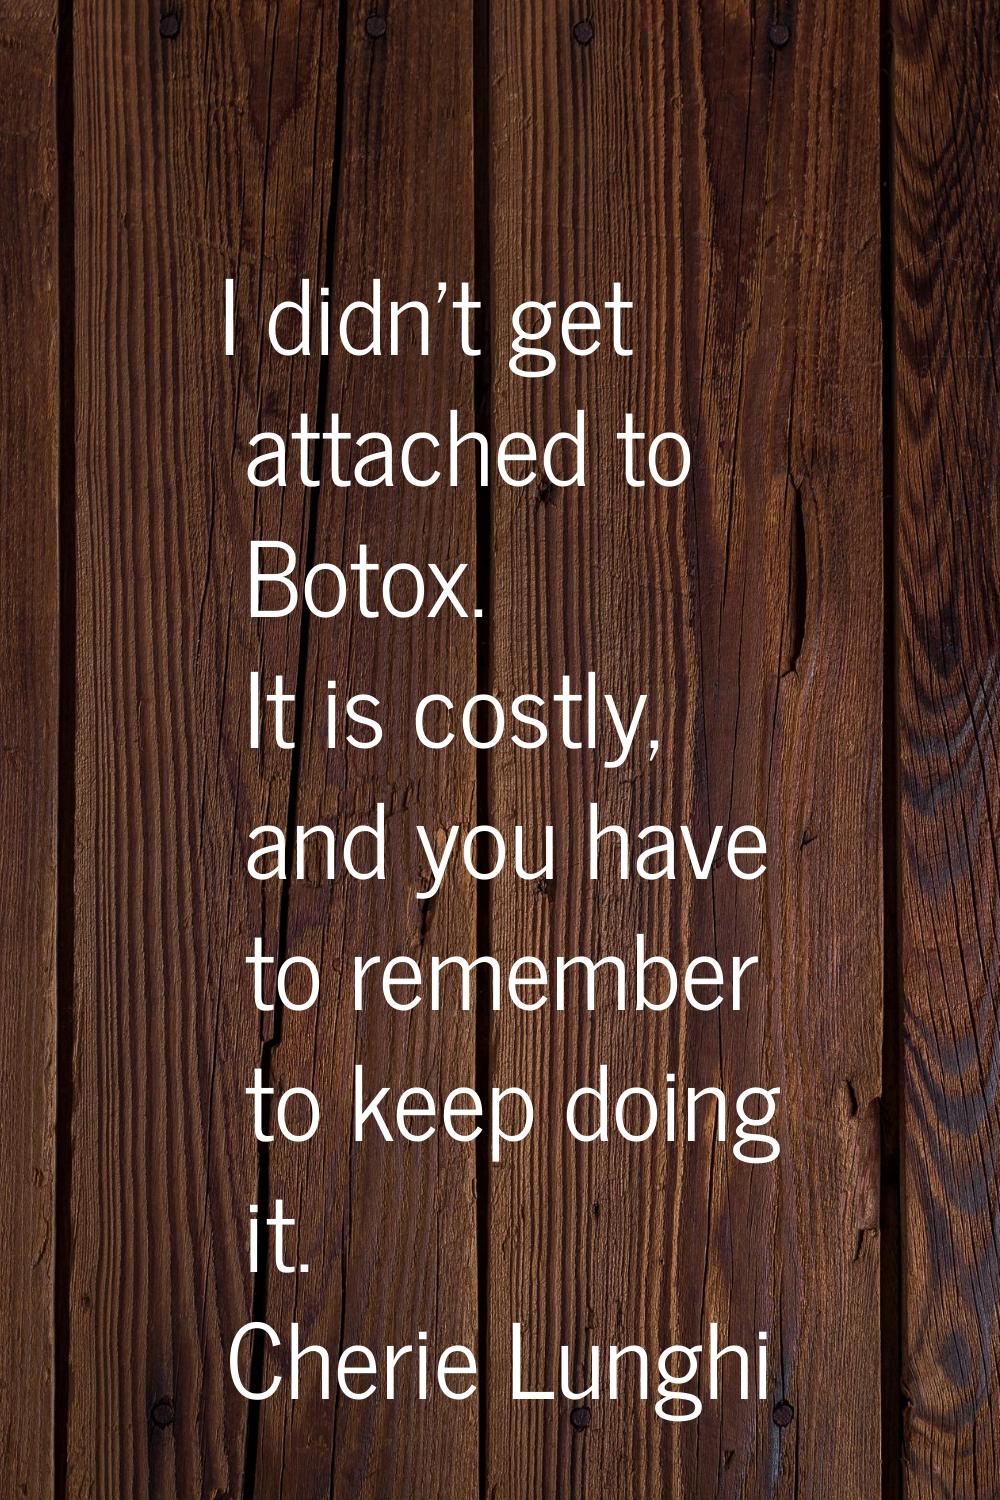 I didn't get attached to Botox. It is costly, and you have to remember to keep doing it.